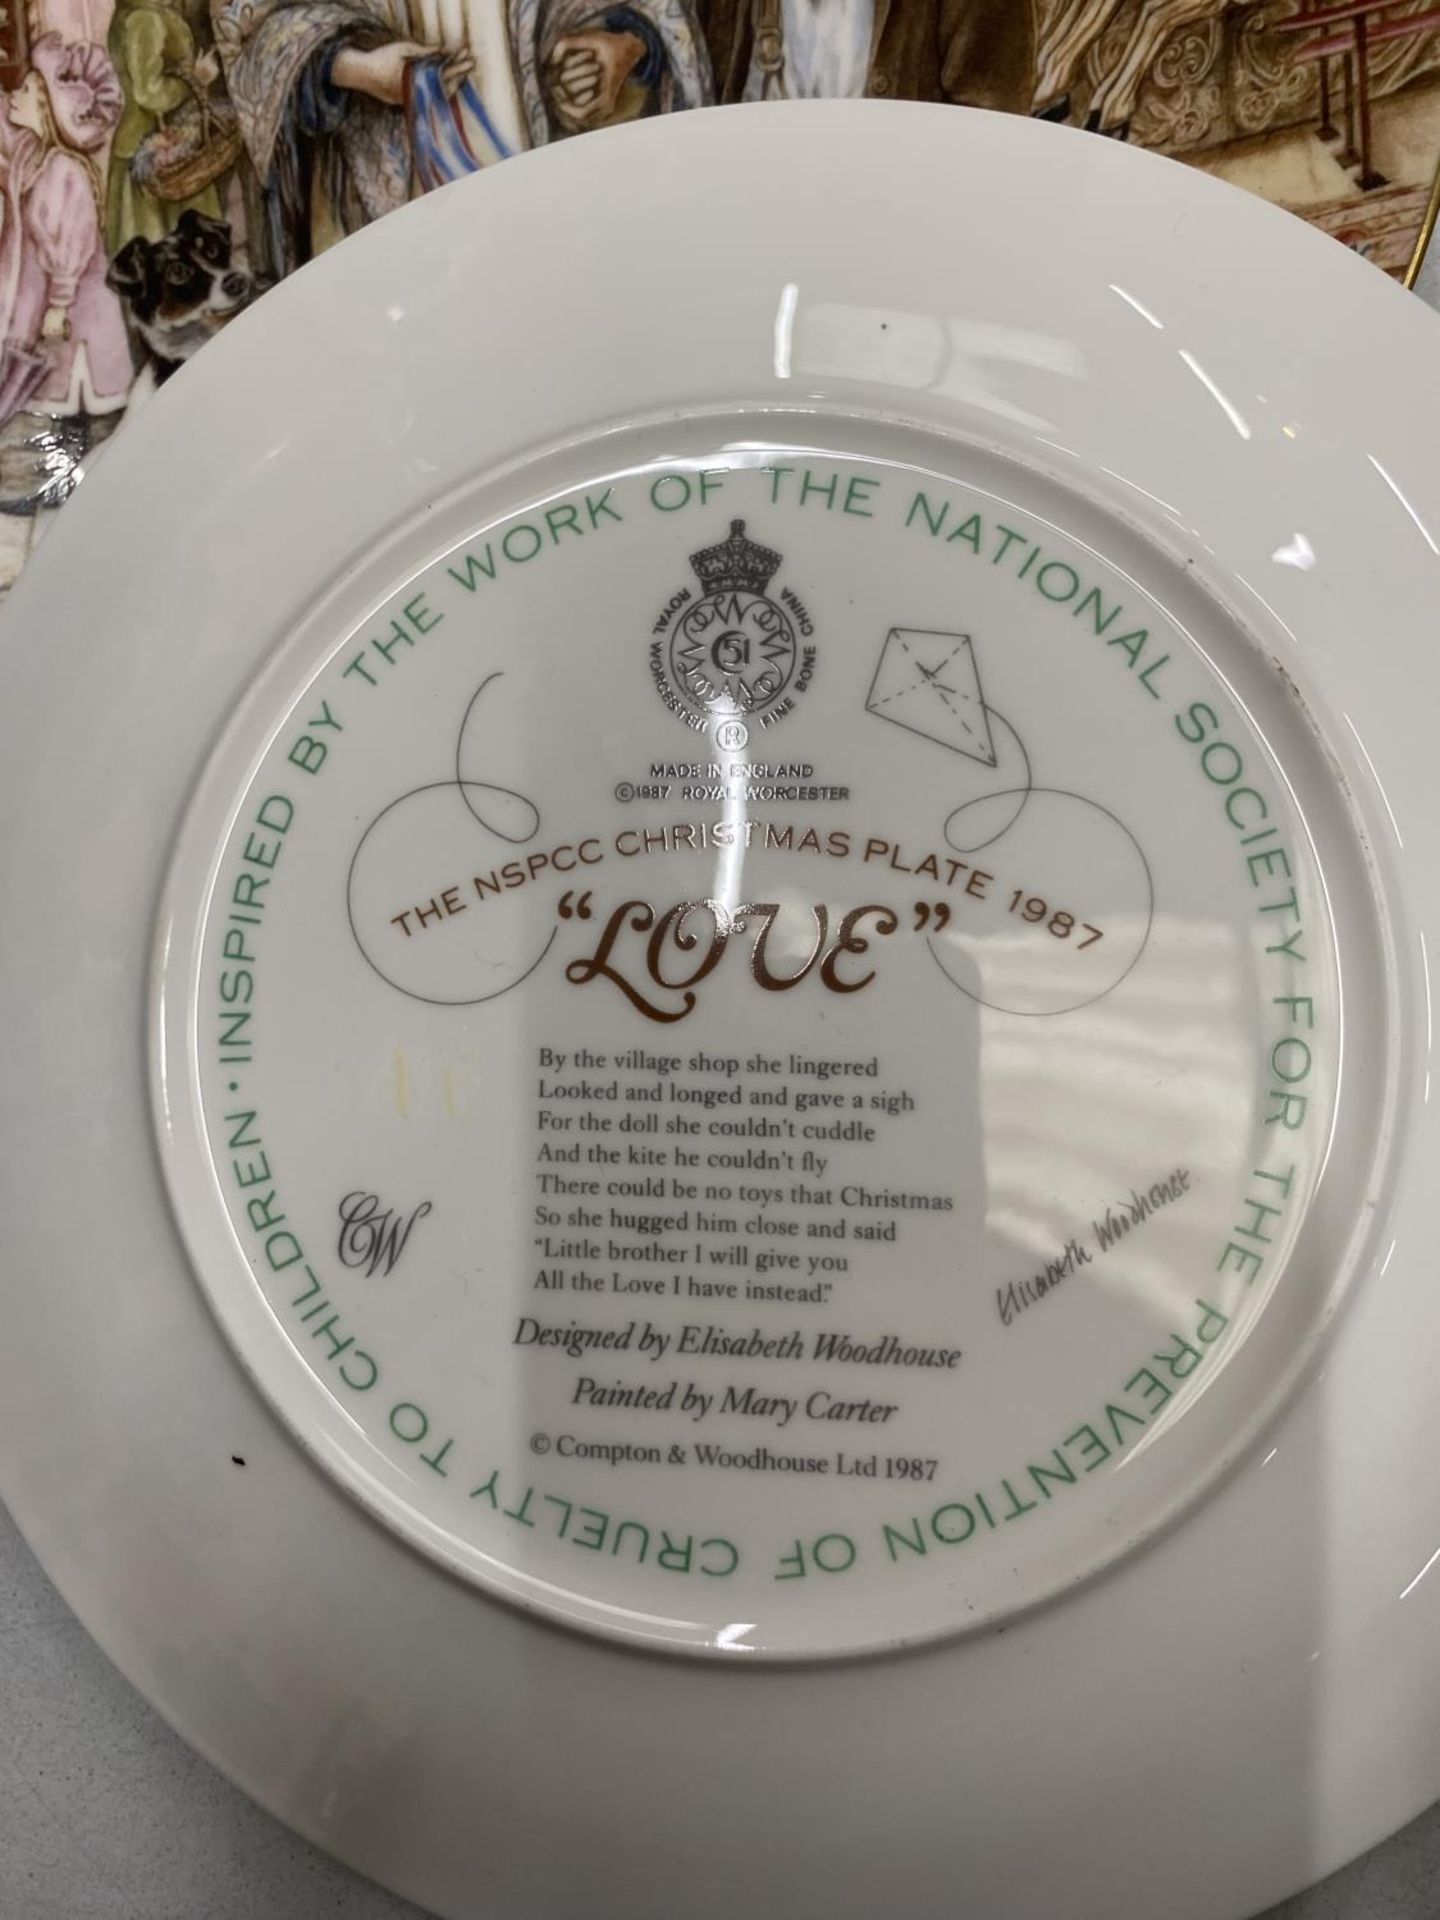 FIVE ROYAL DOULTON NSPCC CHRISTMAS PLATES WITH WOODEN PLATE STANDS - Image 4 of 4